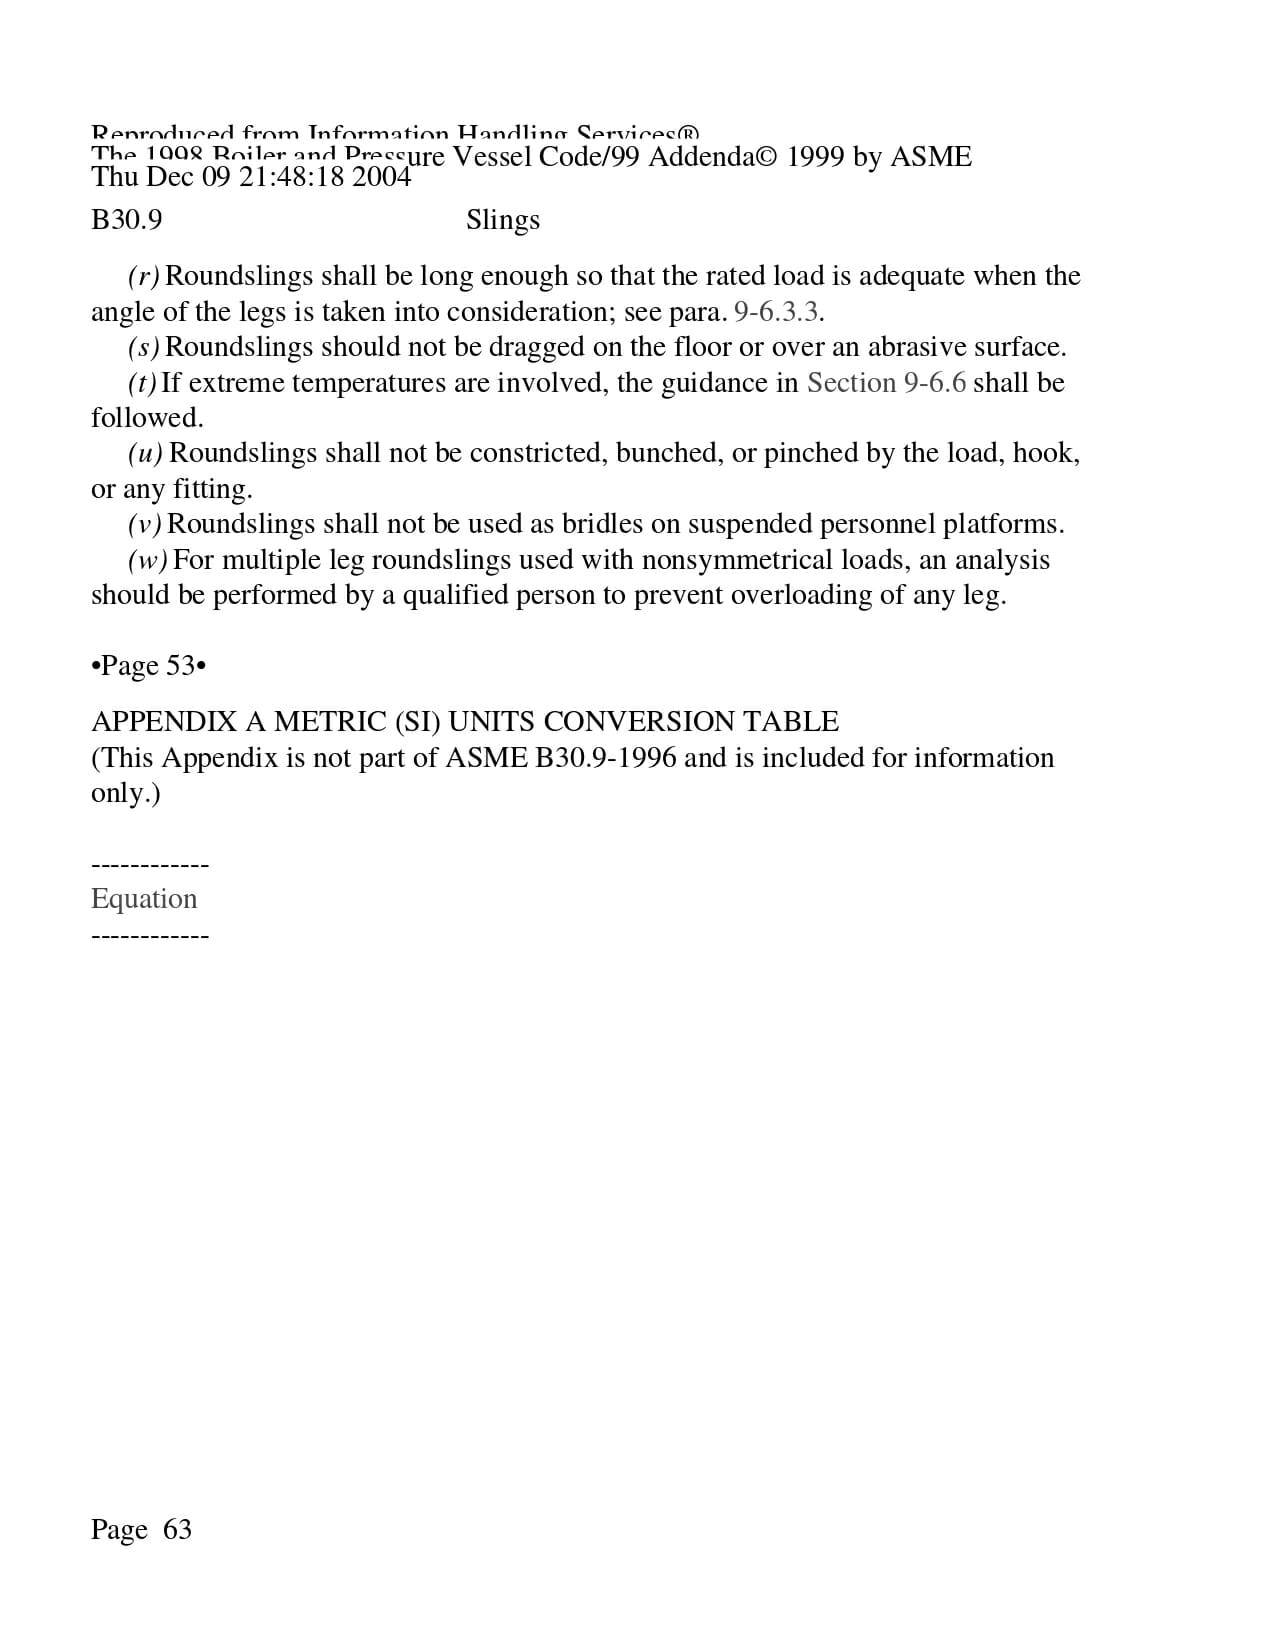 vdocument.in_asme-b309_page-0063